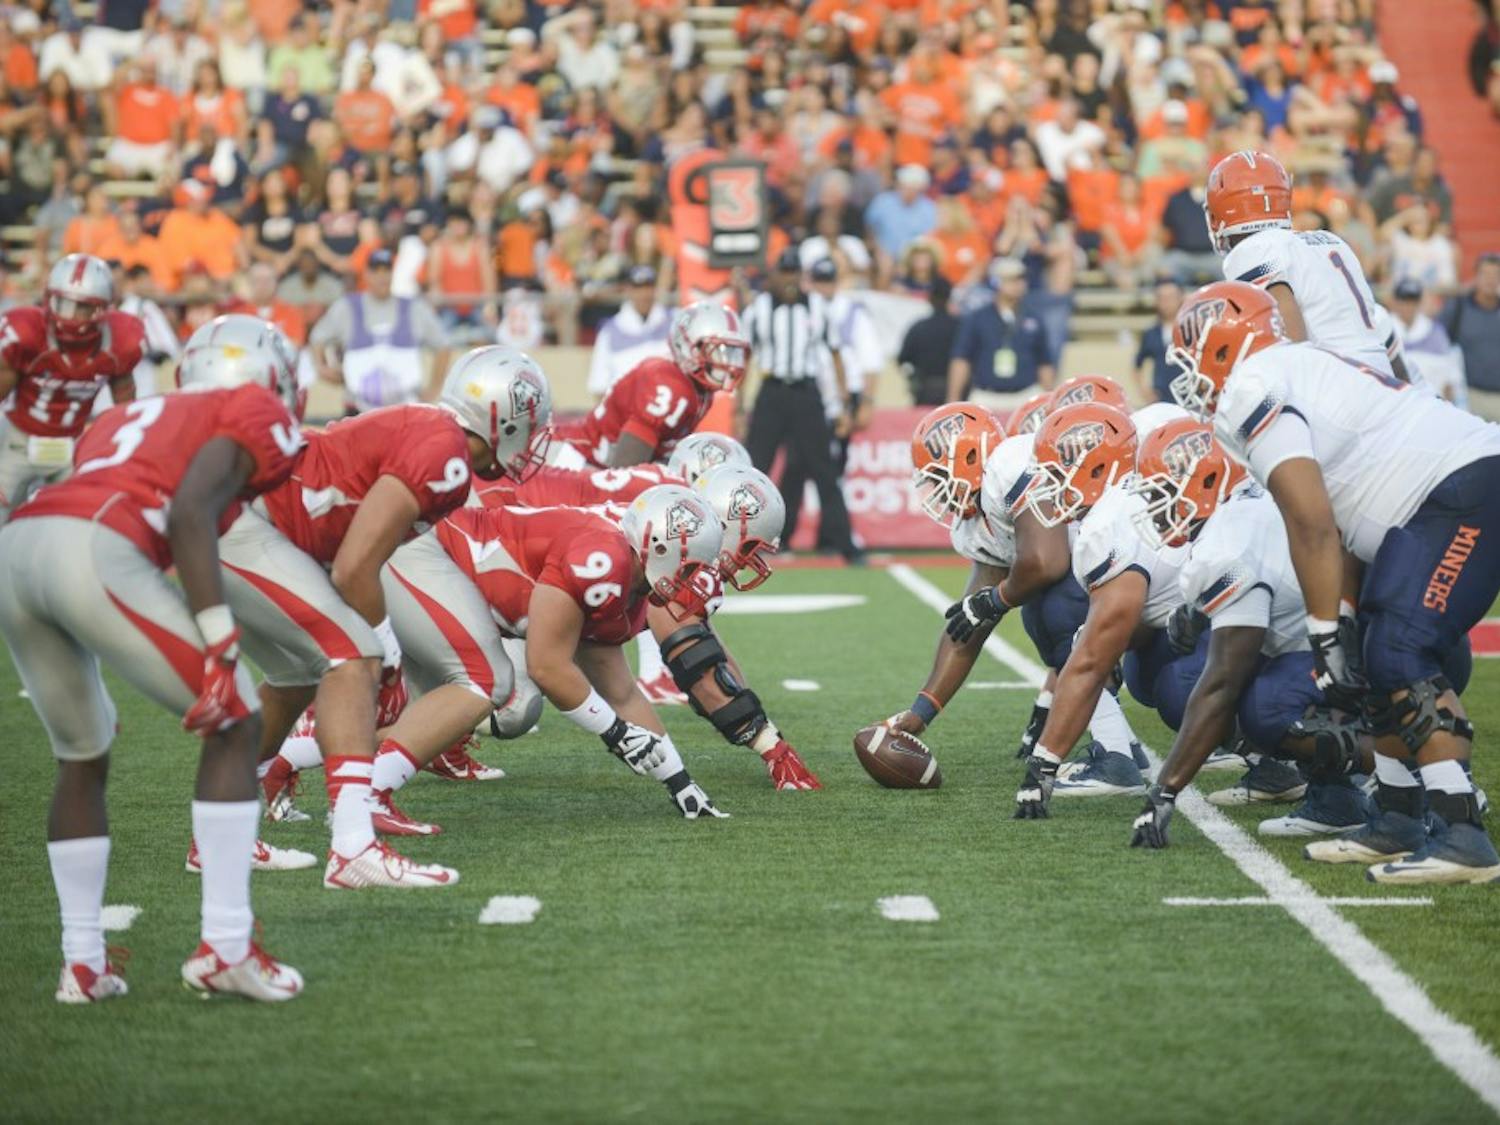 	The UNM defense lines up against UTEP during the season opening game at University Stadium on Saturday night. The Lobos will host No. 17 Arizona State at 5 p.m. Saturday